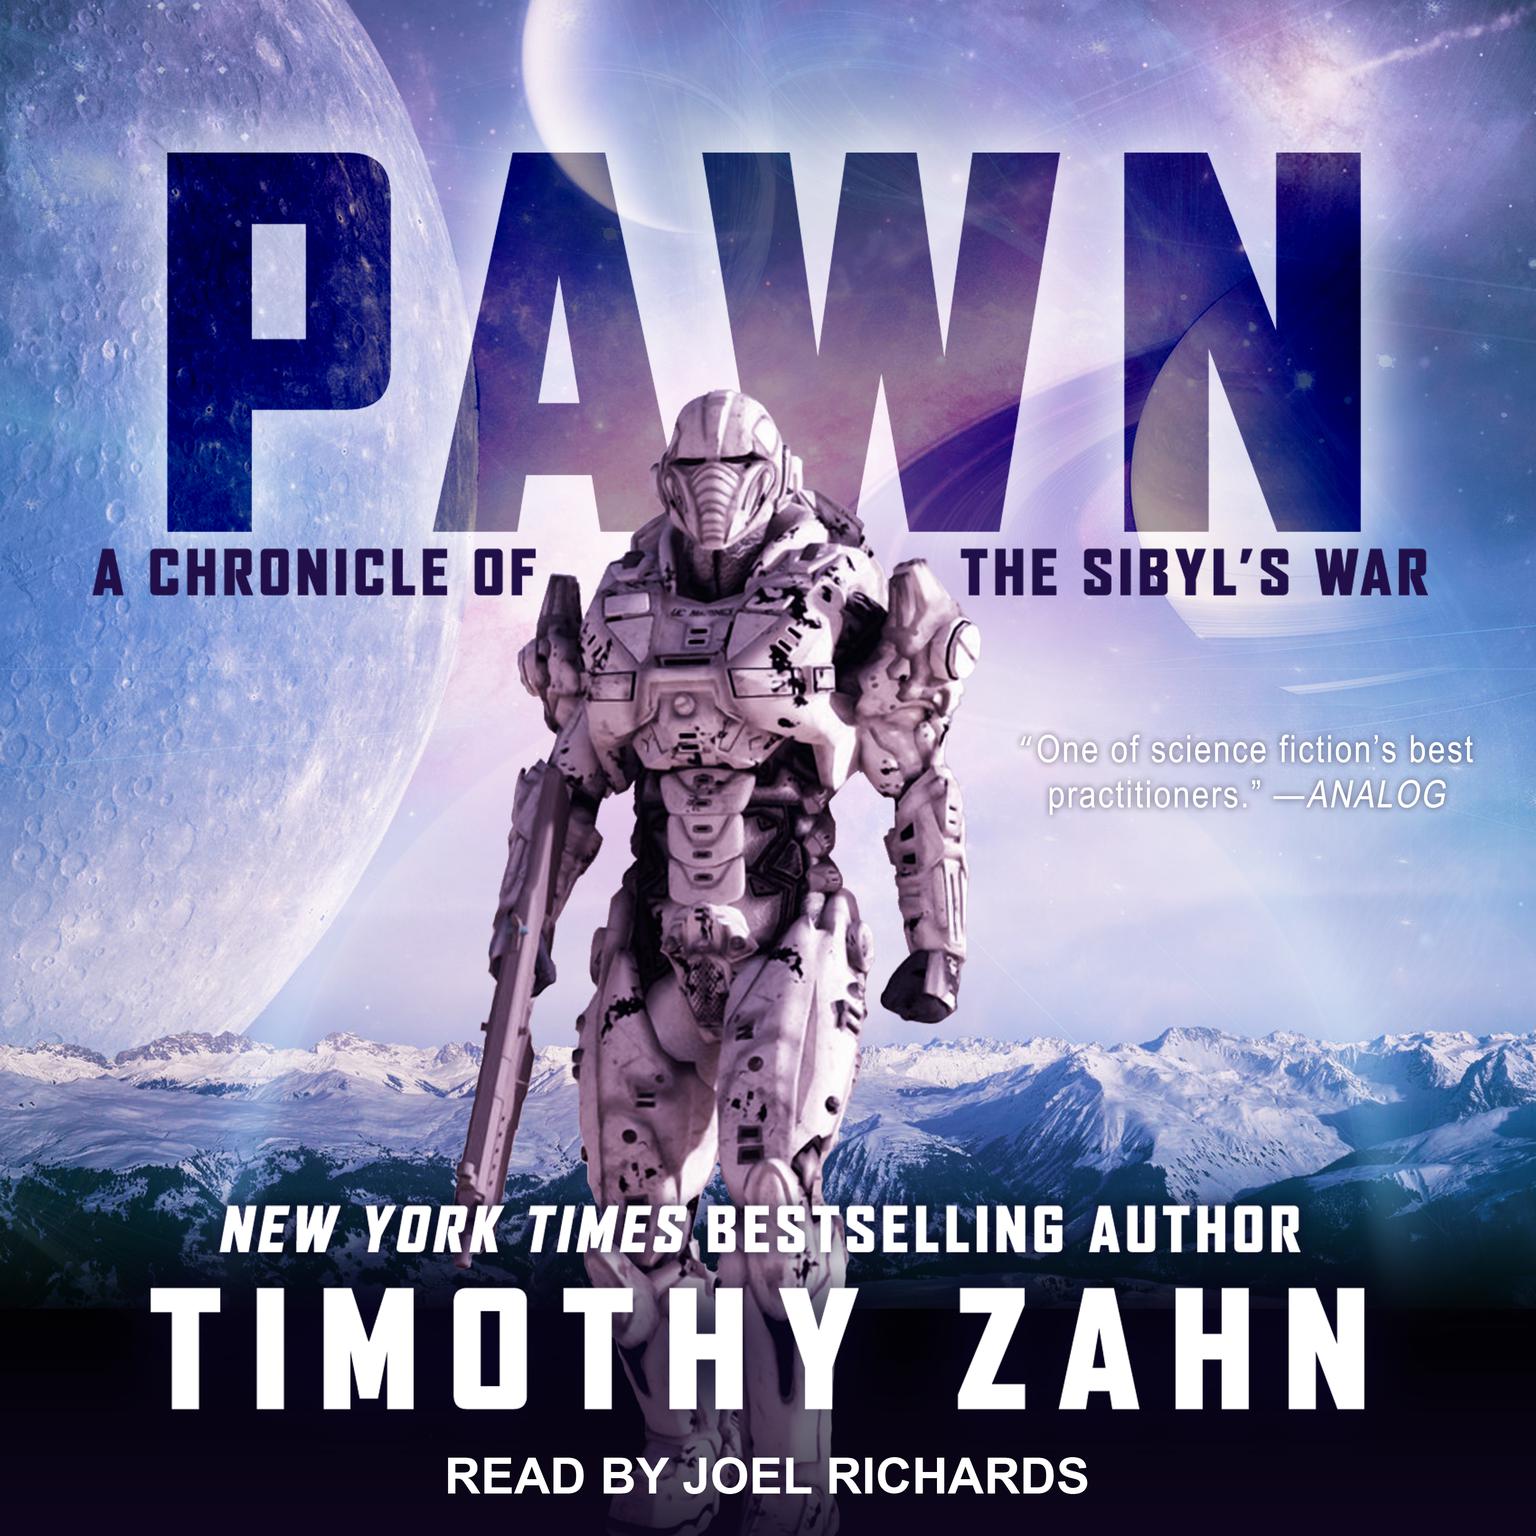 Pawn Audiobook, by Timothy Zahn